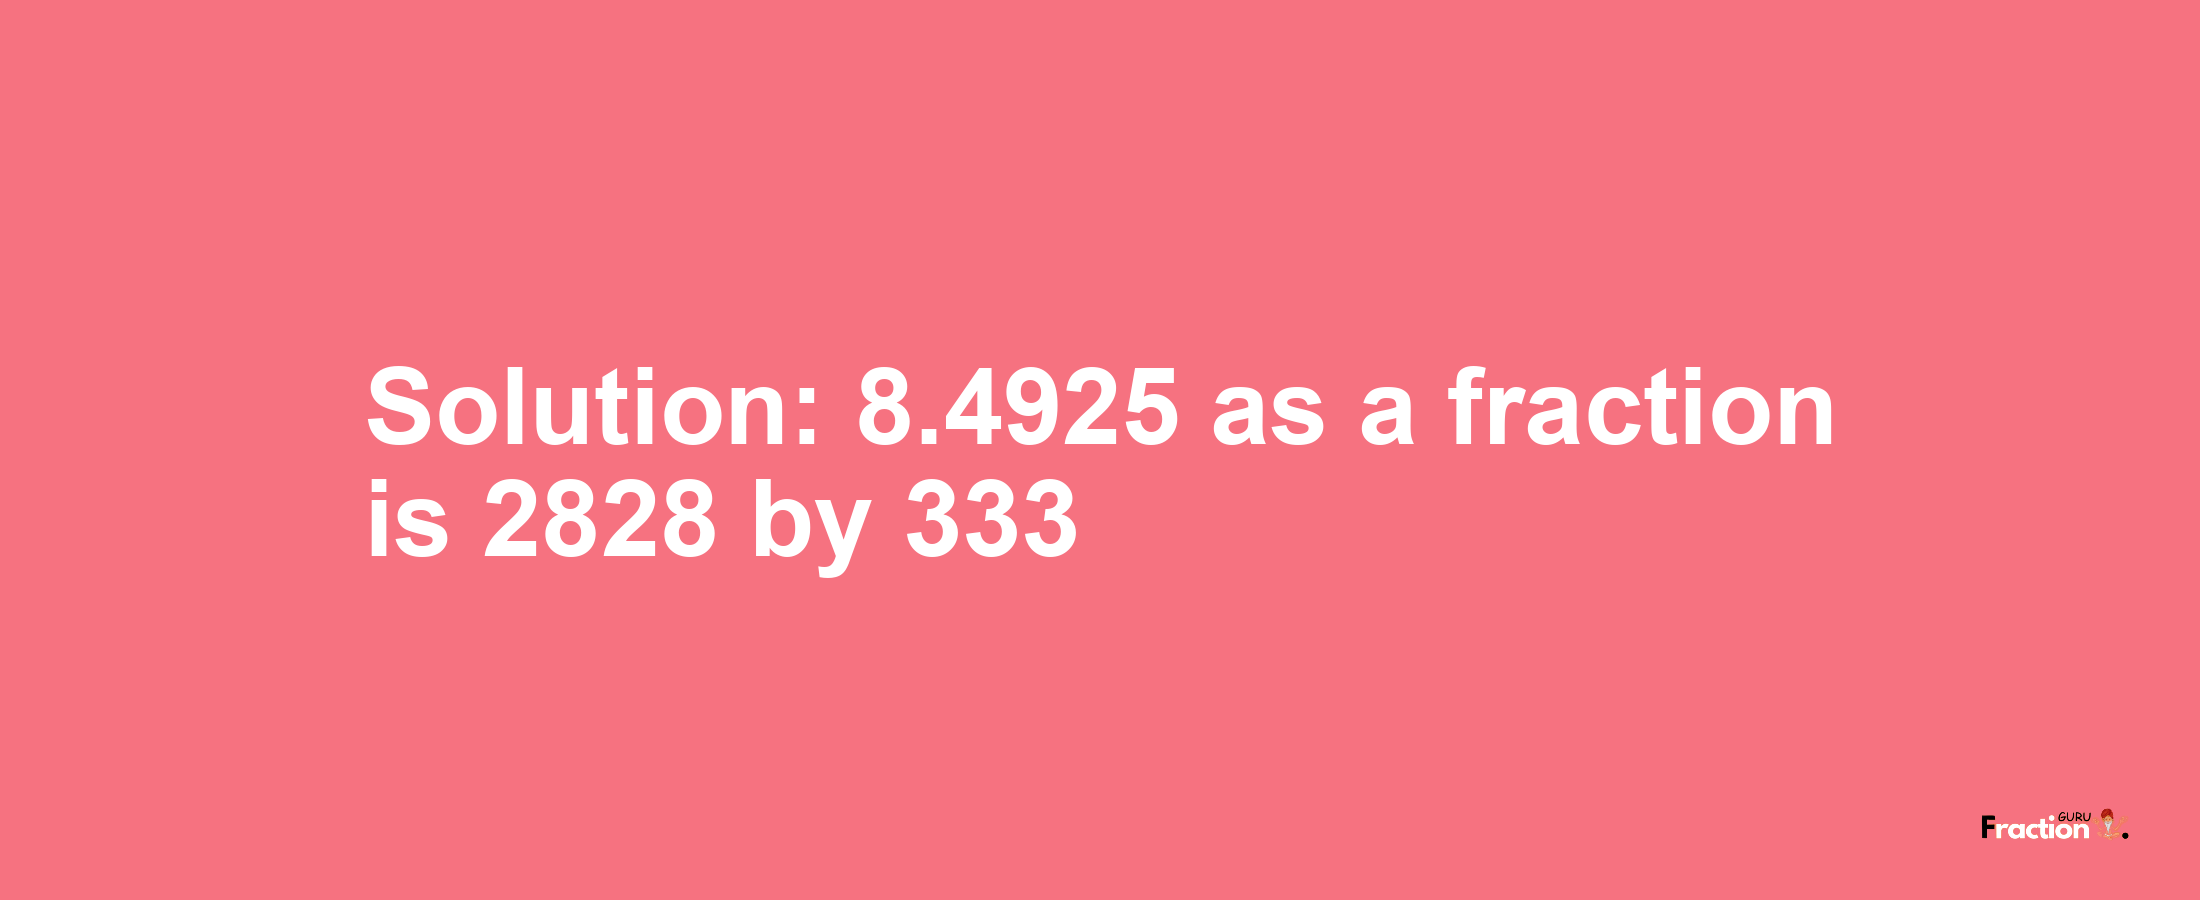 Solution:8.4925 as a fraction is 2828/333